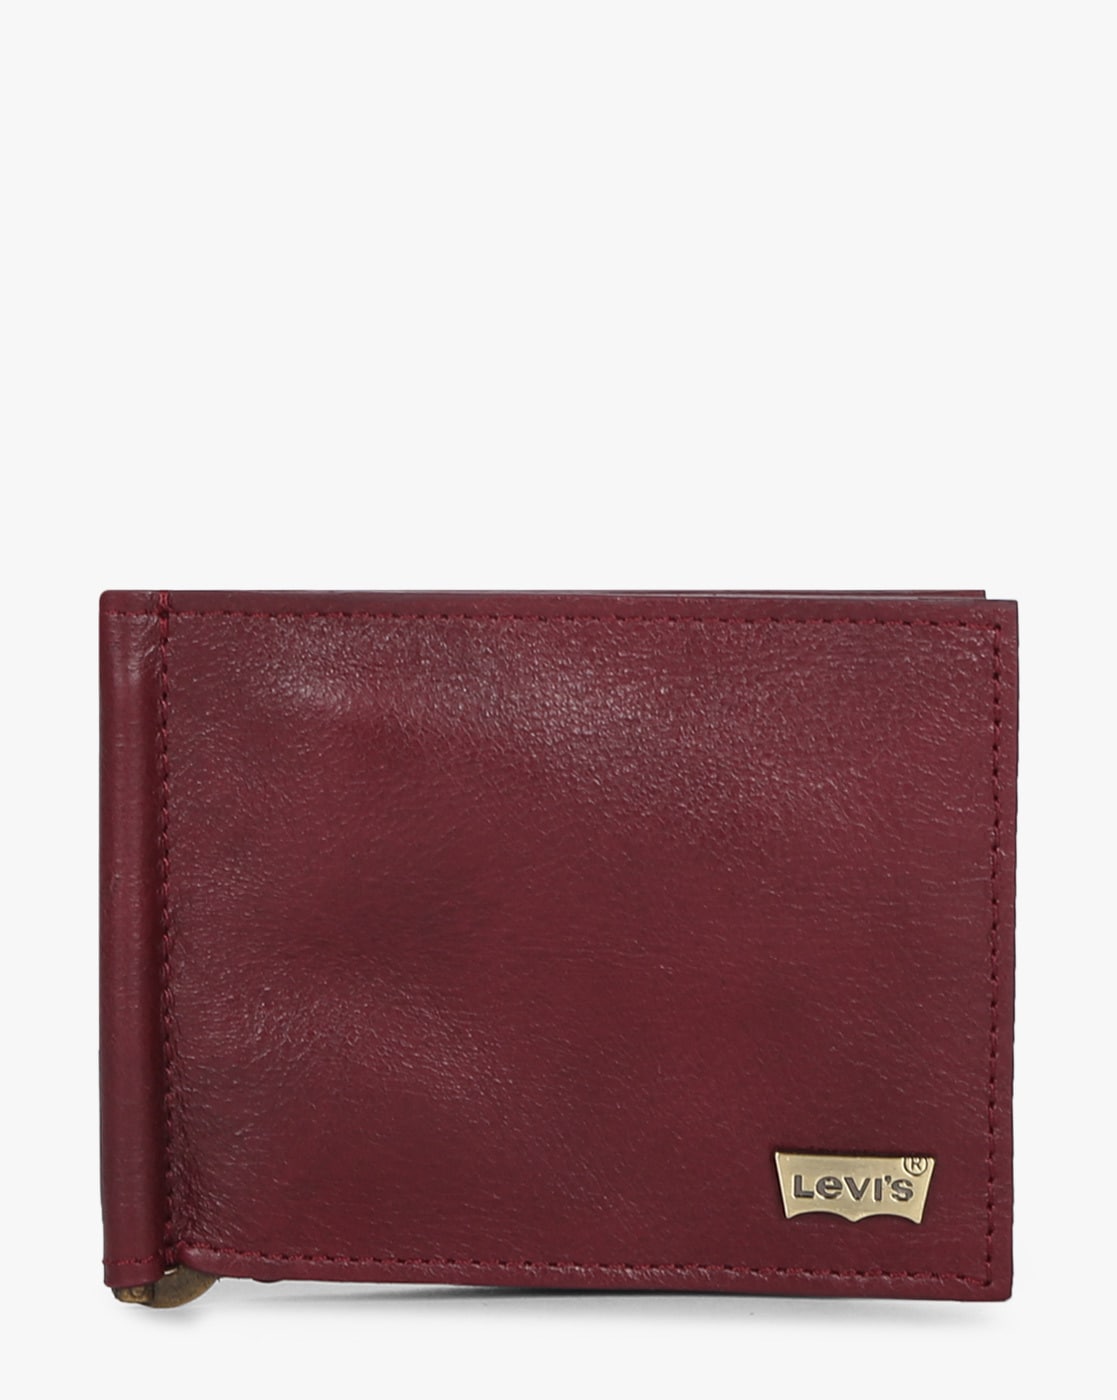 LEVI'S Men's Genuine Leather 8 Card Slots Wallet (Brown) in Pune at best  price by Levi's Store (Sgs Mall) - Justdial